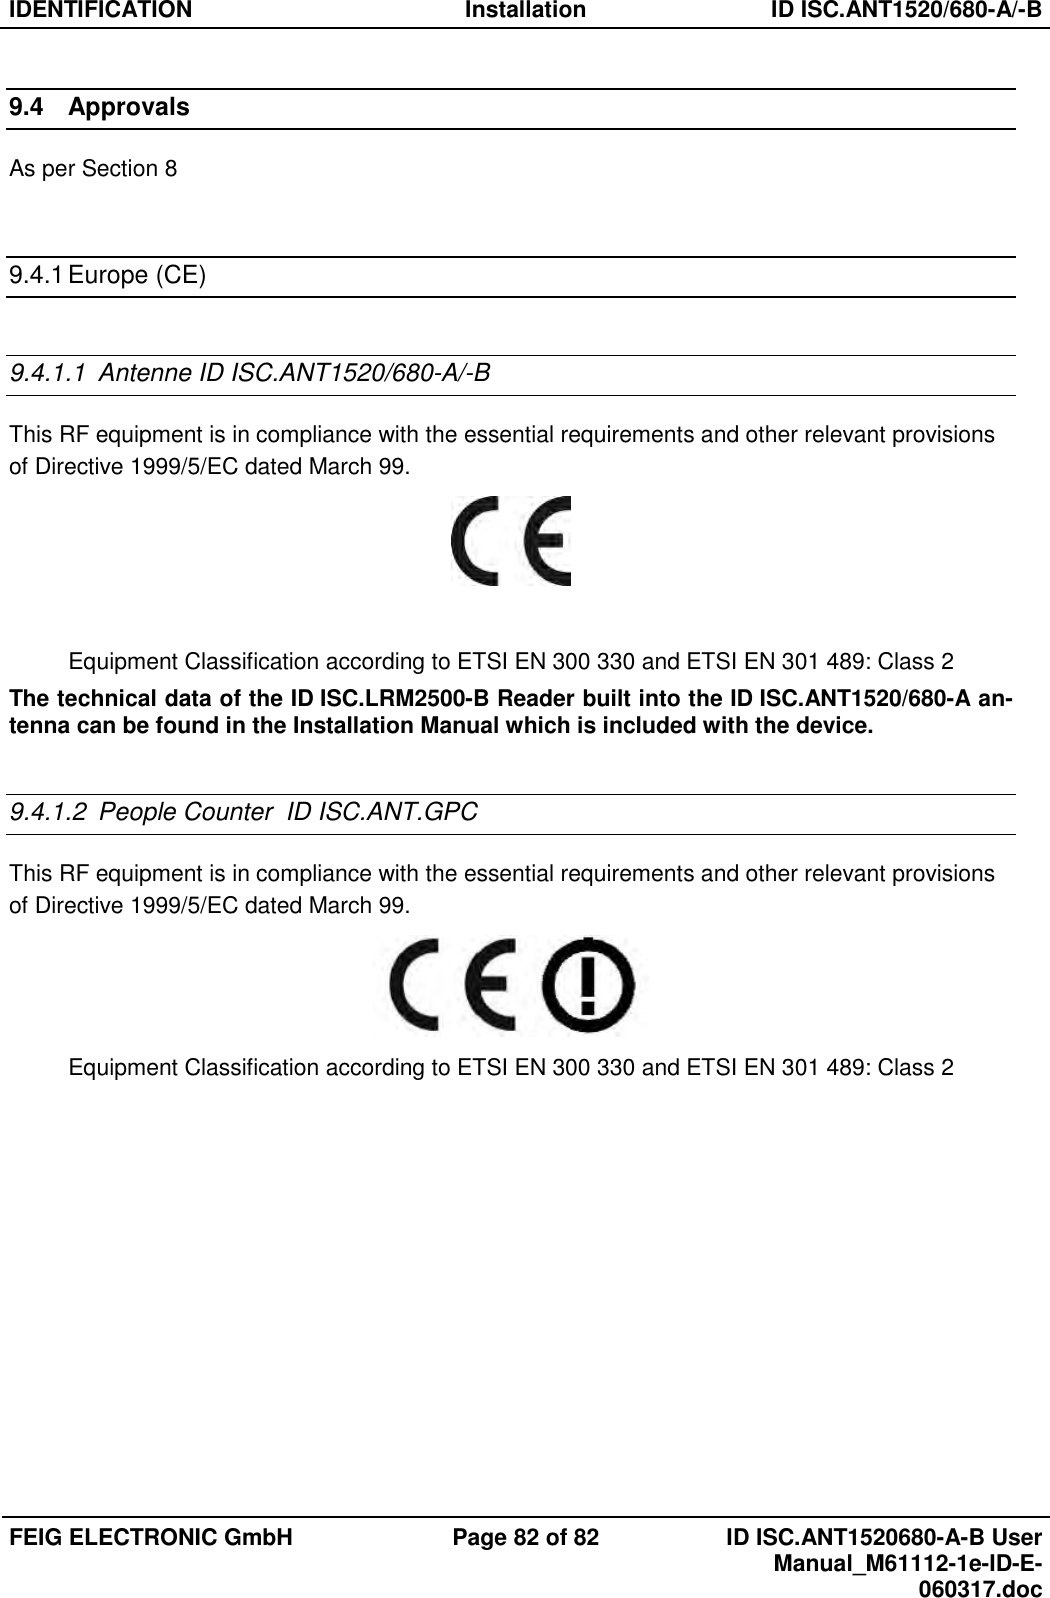 IDENTIFICATION  Installation  ID ISC.ANT1520/680-A/-B  FEIG ELECTRONIC GmbH  Page 82 of 82  ID ISC.ANT1520680-A-B User Manual_M61112-1e-ID-E-060317.doc  9.4  Approvals As per Section 8   9.4.1 Europe (CE)  9.4.1.1  Antenne ID ISC.ANT1520/680-A/-B This RF equipment is in compliance with the essential requirements and other relevant provisions of Directive 1999/5/EC dated March 99.   Equipment Classification according to ETSI EN 300 330 and ETSI EN 301 489: Class 2 The technical data of the ID ISC.LRM2500-B Reader built into the ID ISC.ANT1520/680-A an-tenna can be found in the Installation Manual which is included with the device.  9.4.1.2  People Counter  ID ISC.ANT.GPC This RF equipment is in compliance with the essential requirements and other relevant provisions of Directive 1999/5/EC dated March 99.  Equipment Classification according to ETSI EN 300 330 and ETSI EN 301 489: Class 2  